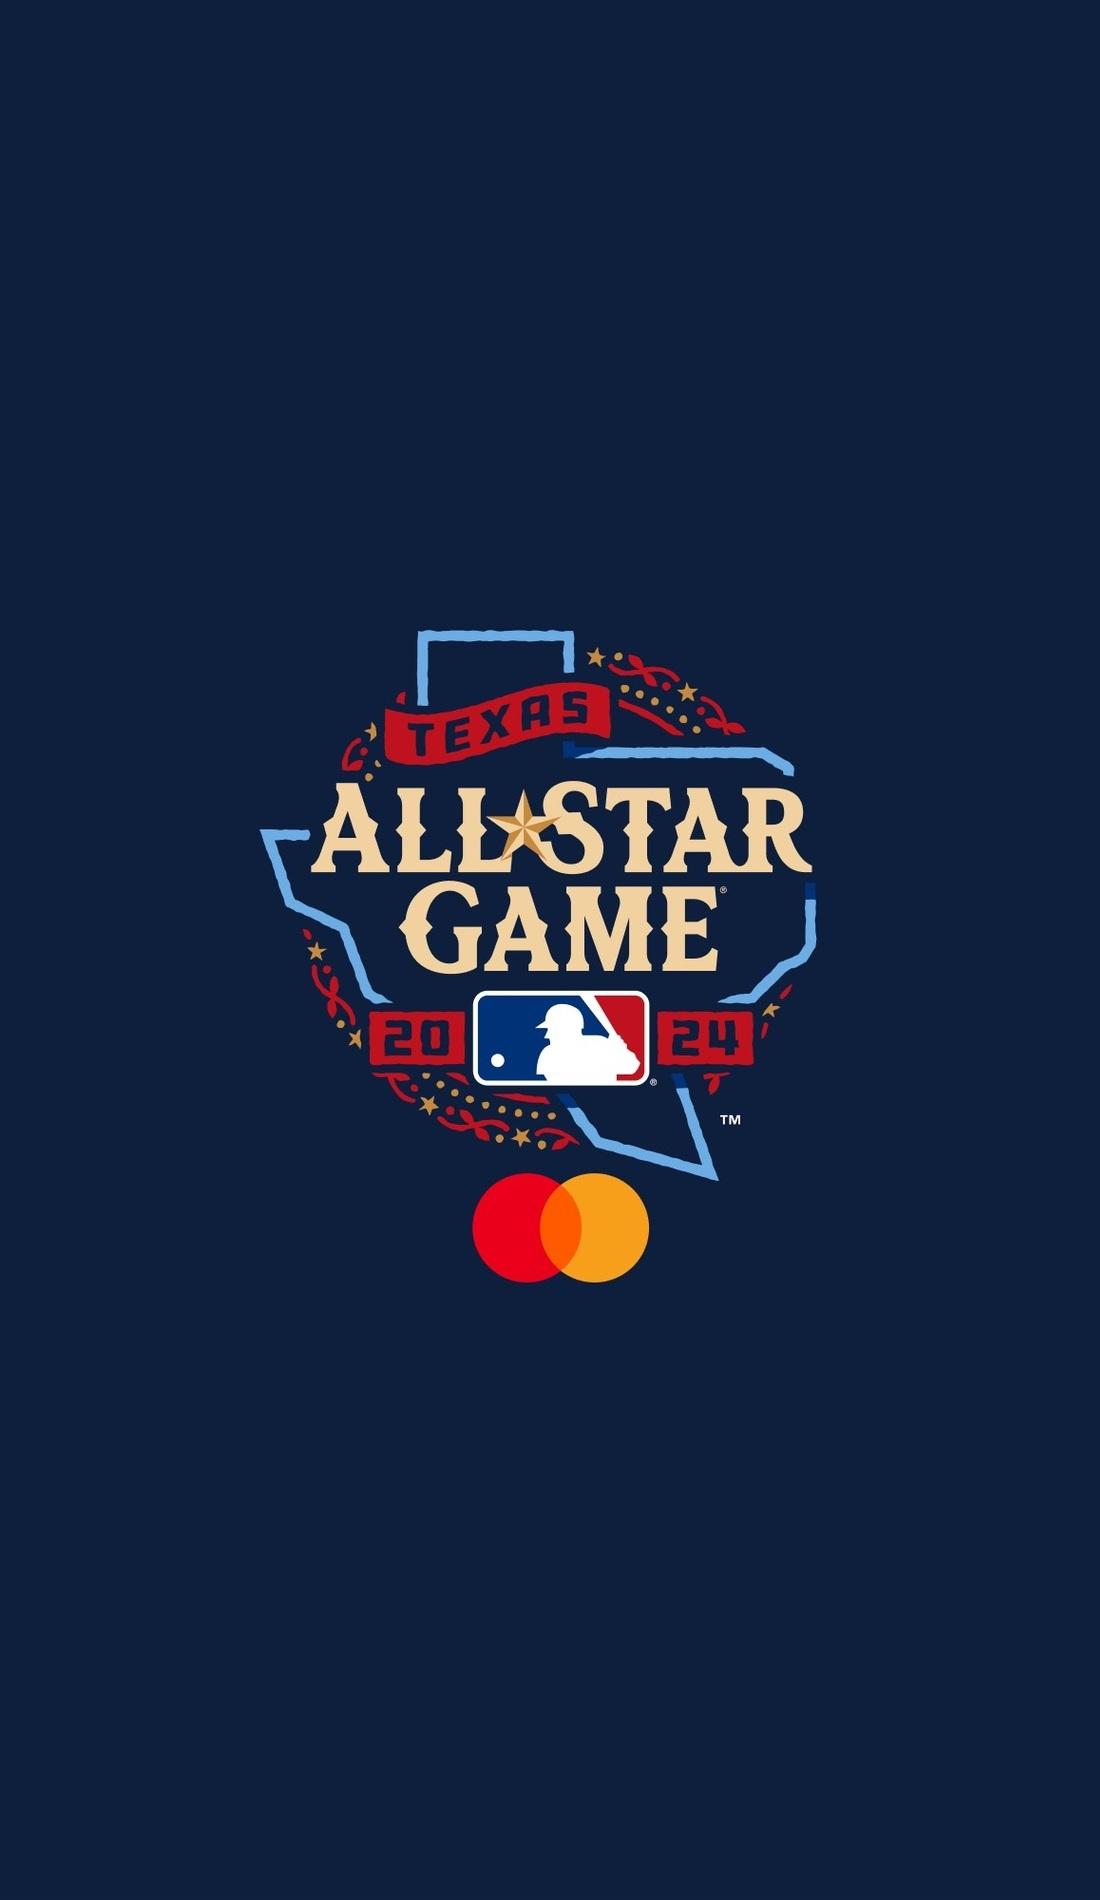 MLB All-Star Game Tickets - Official Ticket Marketplace